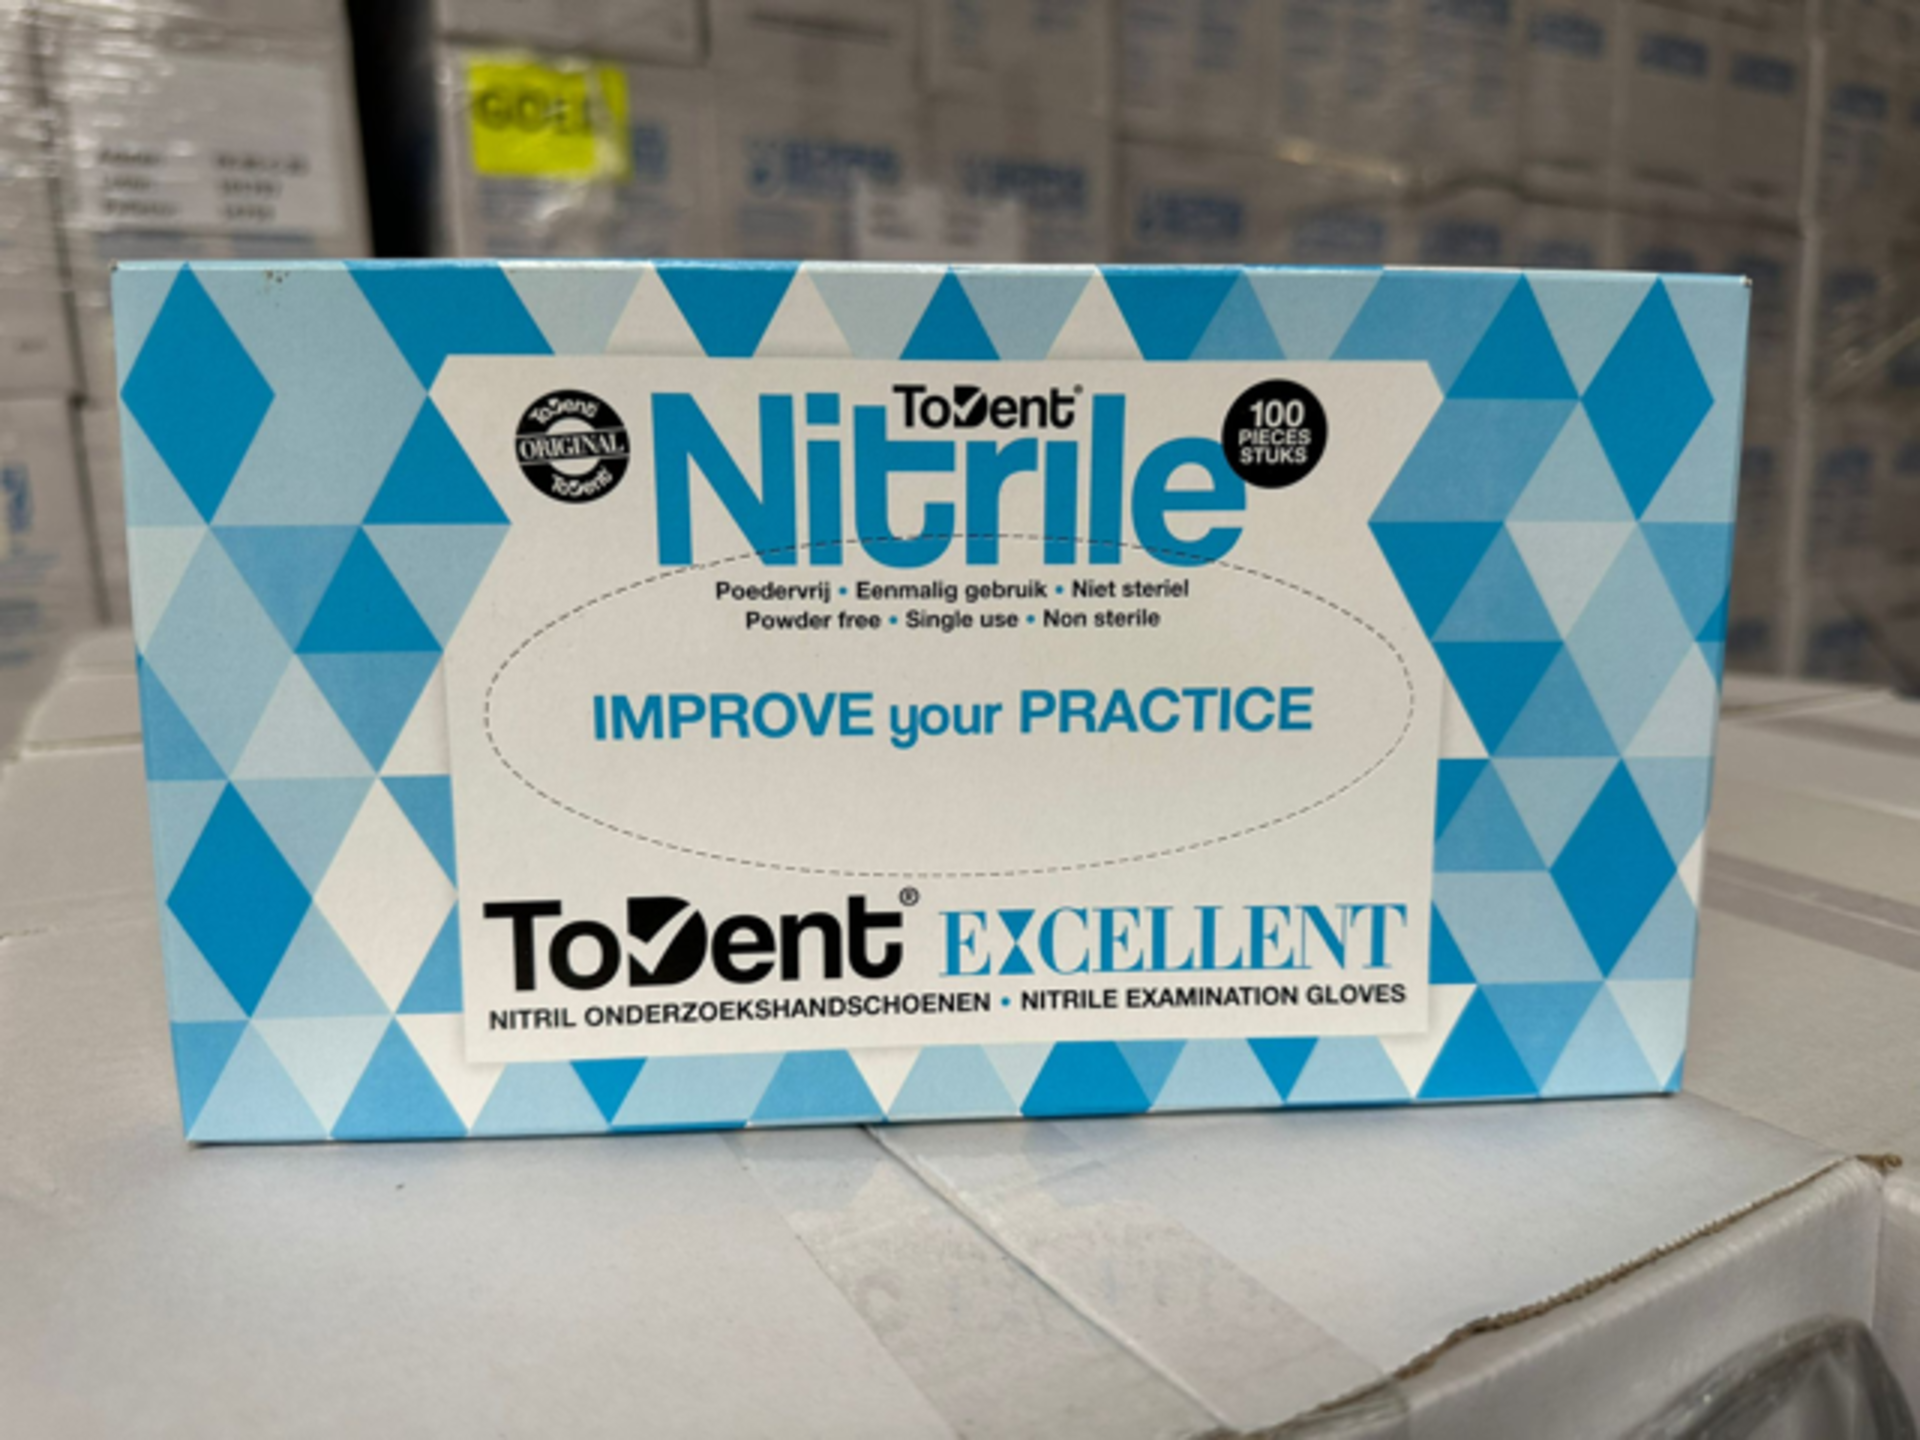 720 X BRAND NEW PACKS OF 100 TODENT BLUE NITRILE EXAMINATION GLOVES SIZE XL EXP MAY 2025 - Image 3 of 3